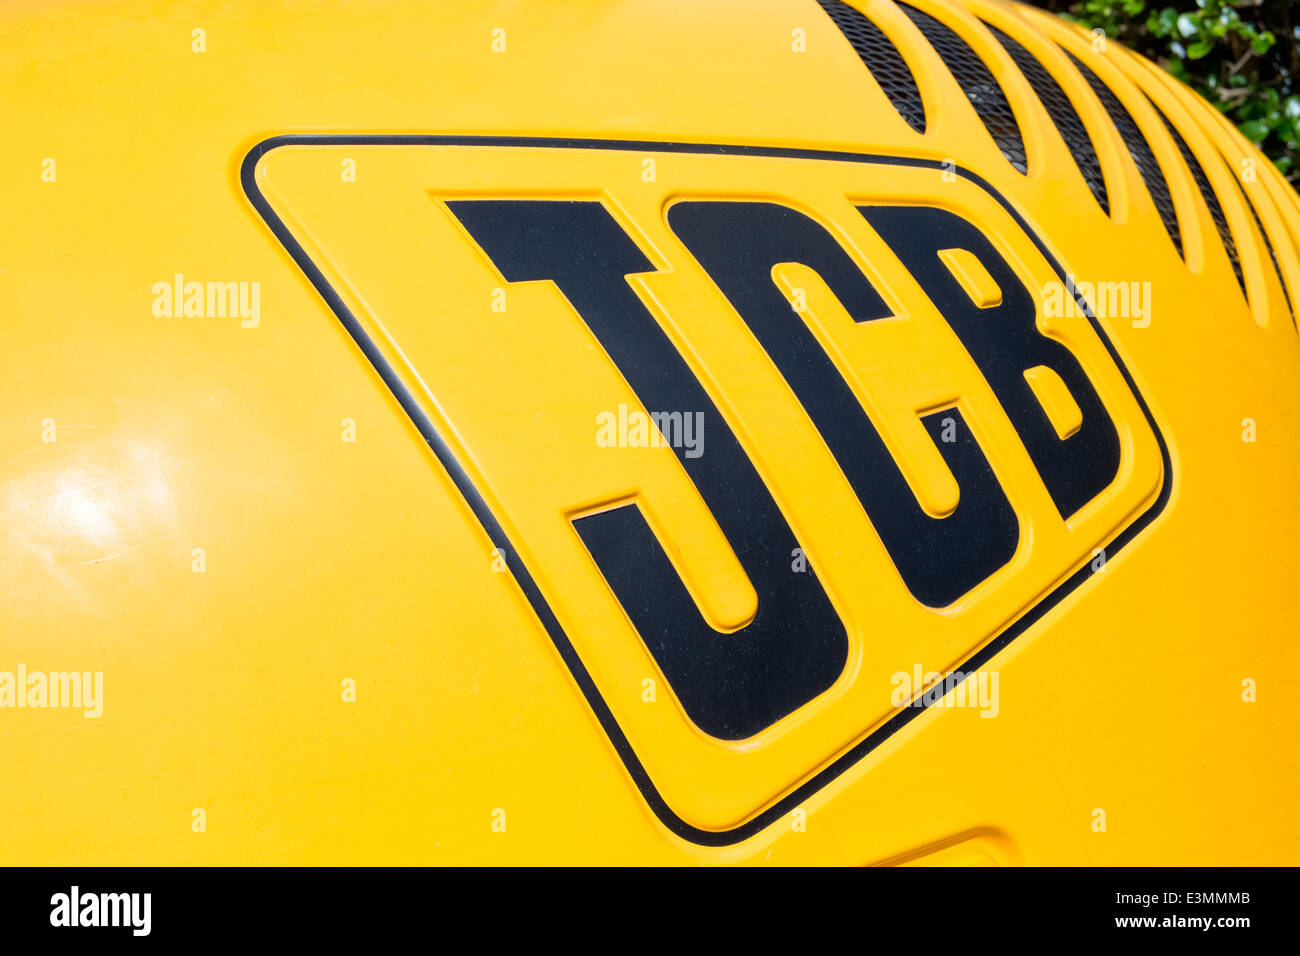 The JCB logo on a piece of construction equipment Stock Photo